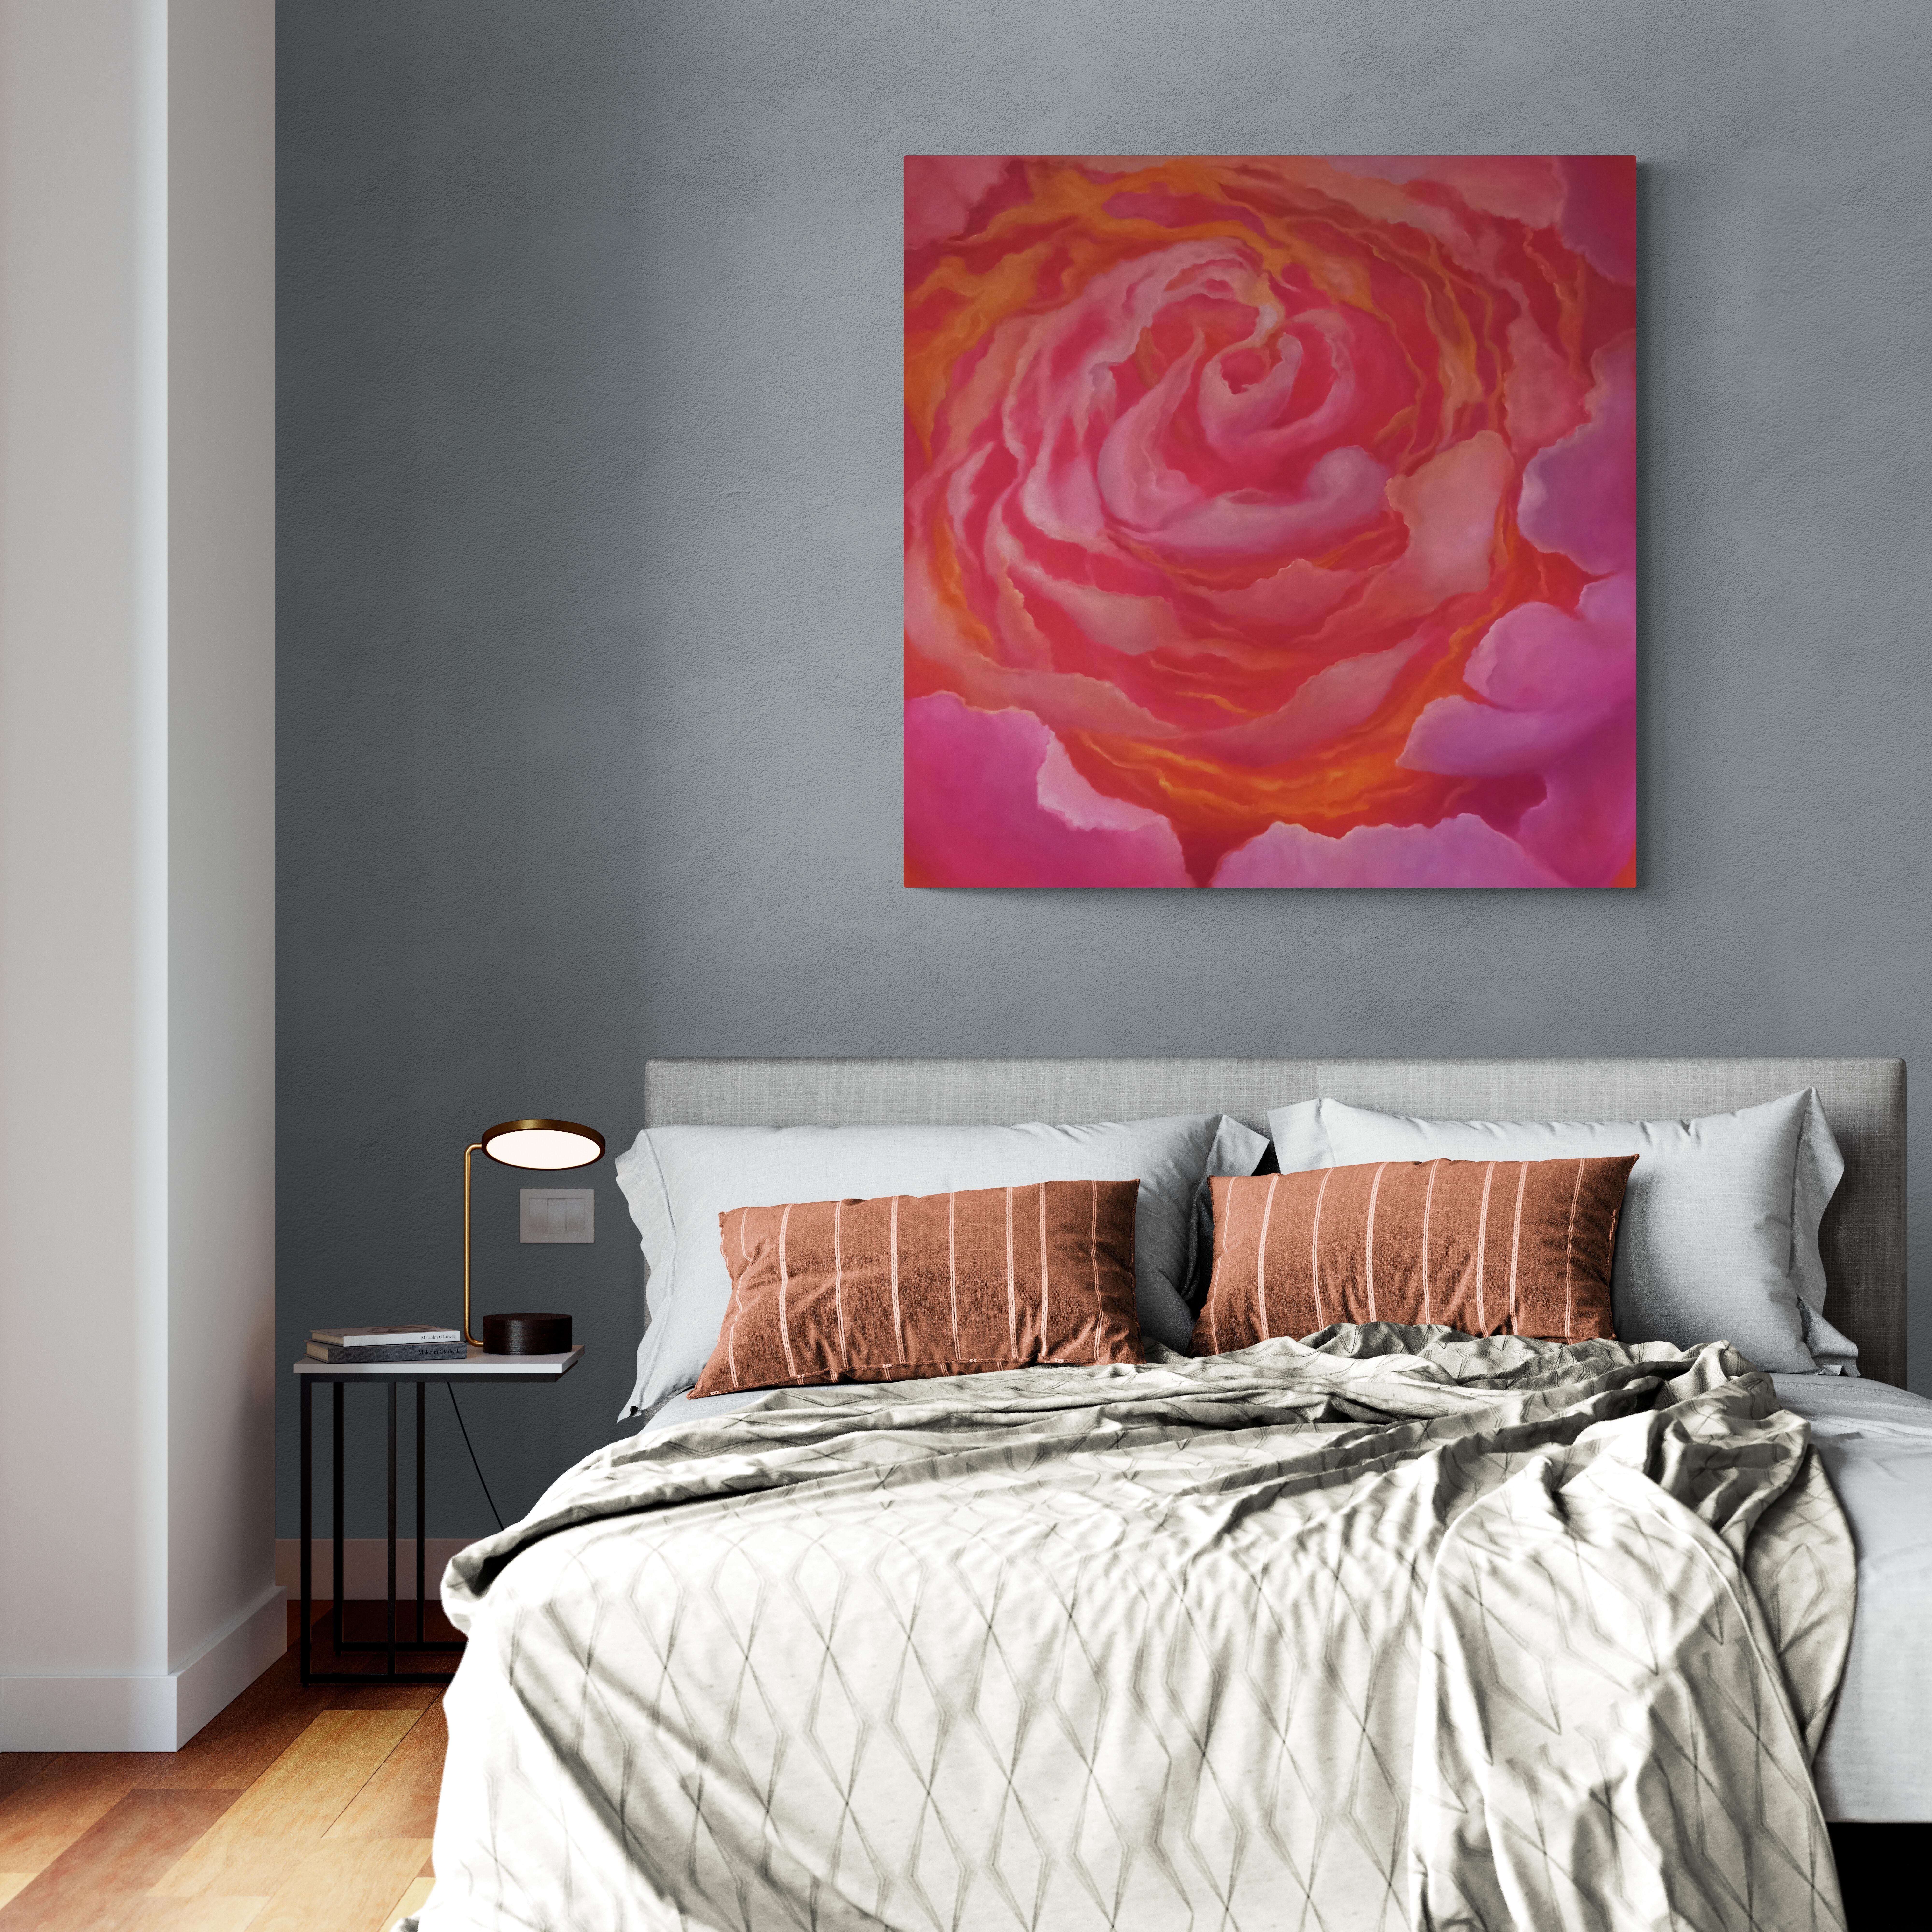 Rose Dorè, Contemporary Signed Original Pink Rose Flower Oil Painting on Canvas 7